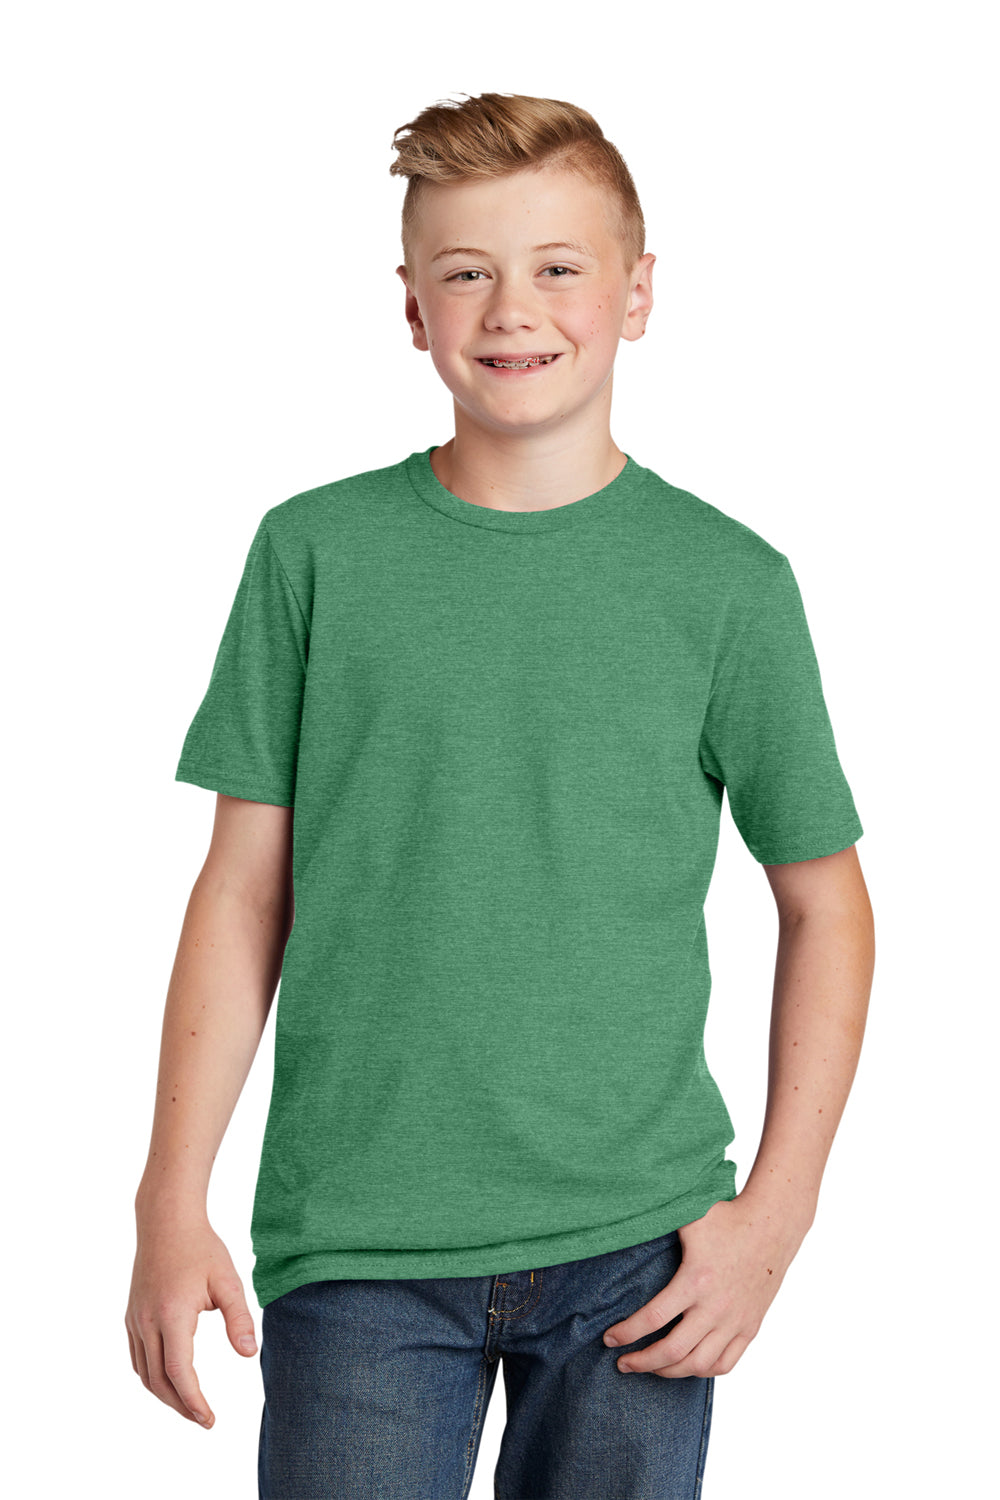 District DT6000Y Youth Very Important Short Sleeve Crewneck T-Shirt Heather Kelly Green Front